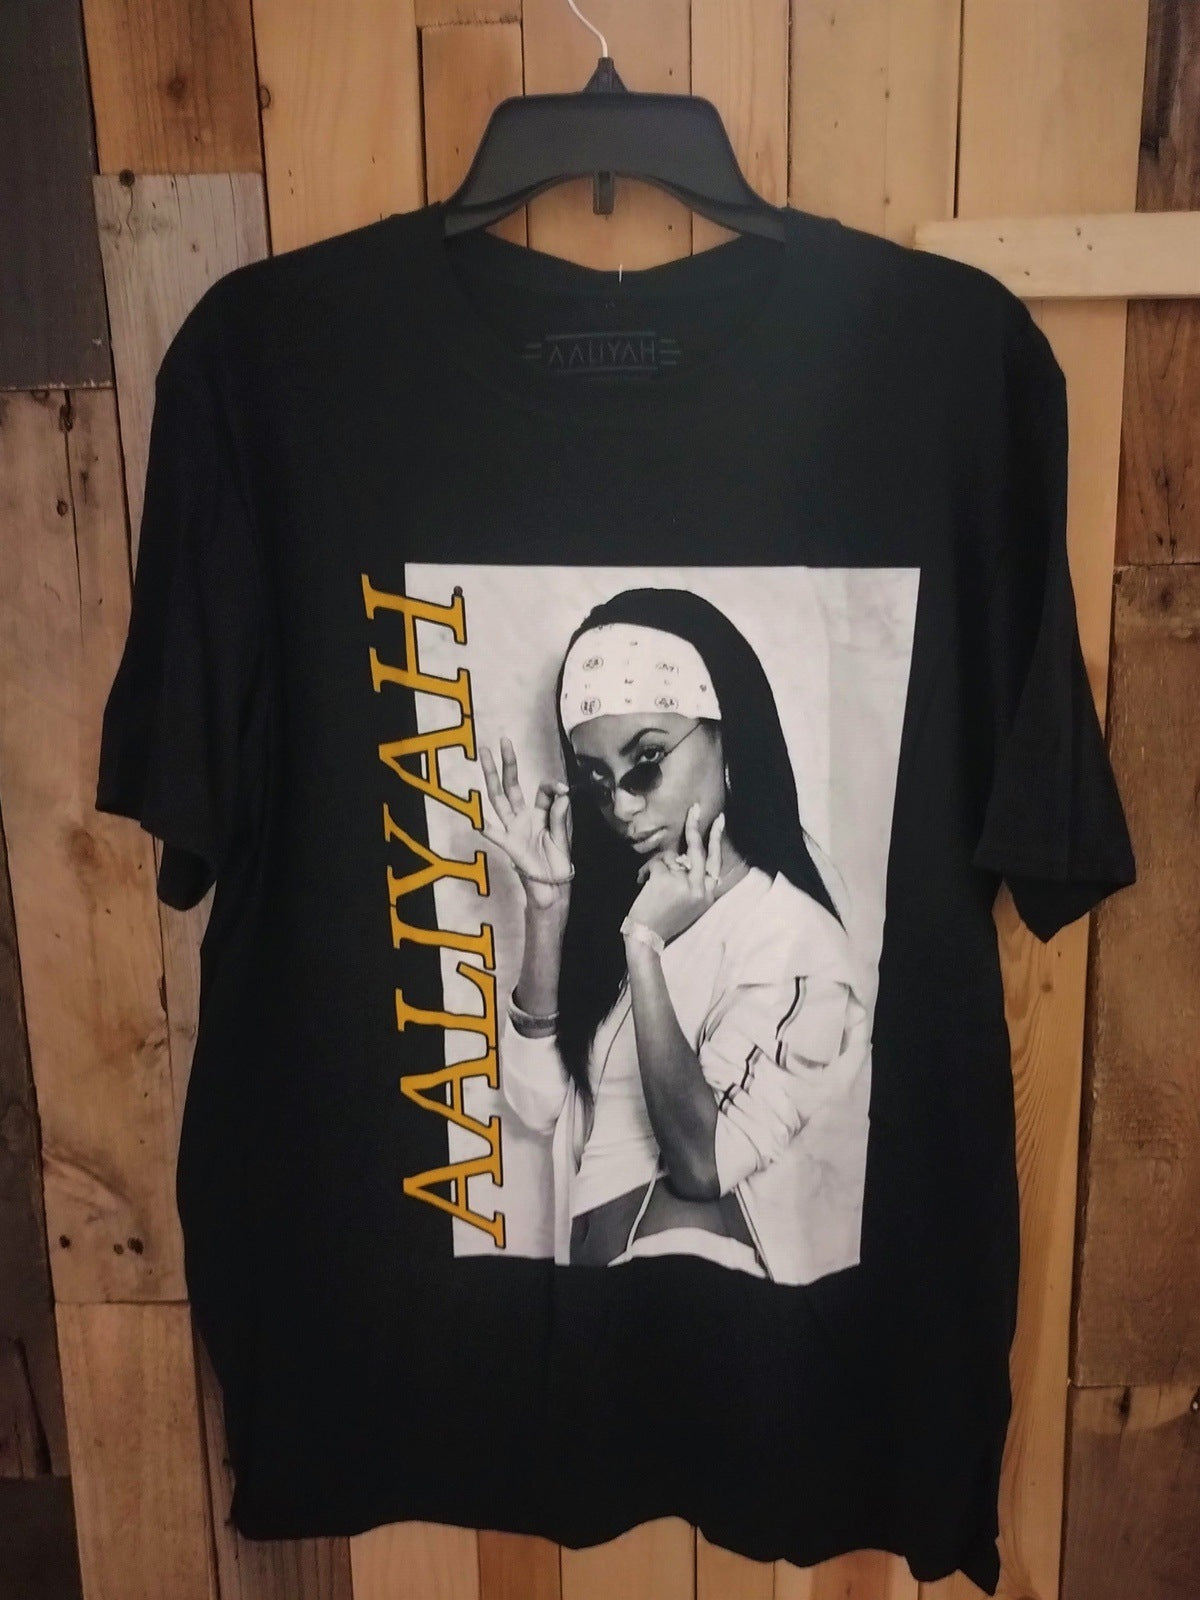 Aaliyah Official Merchandise T Shirt Size Large 263652WH